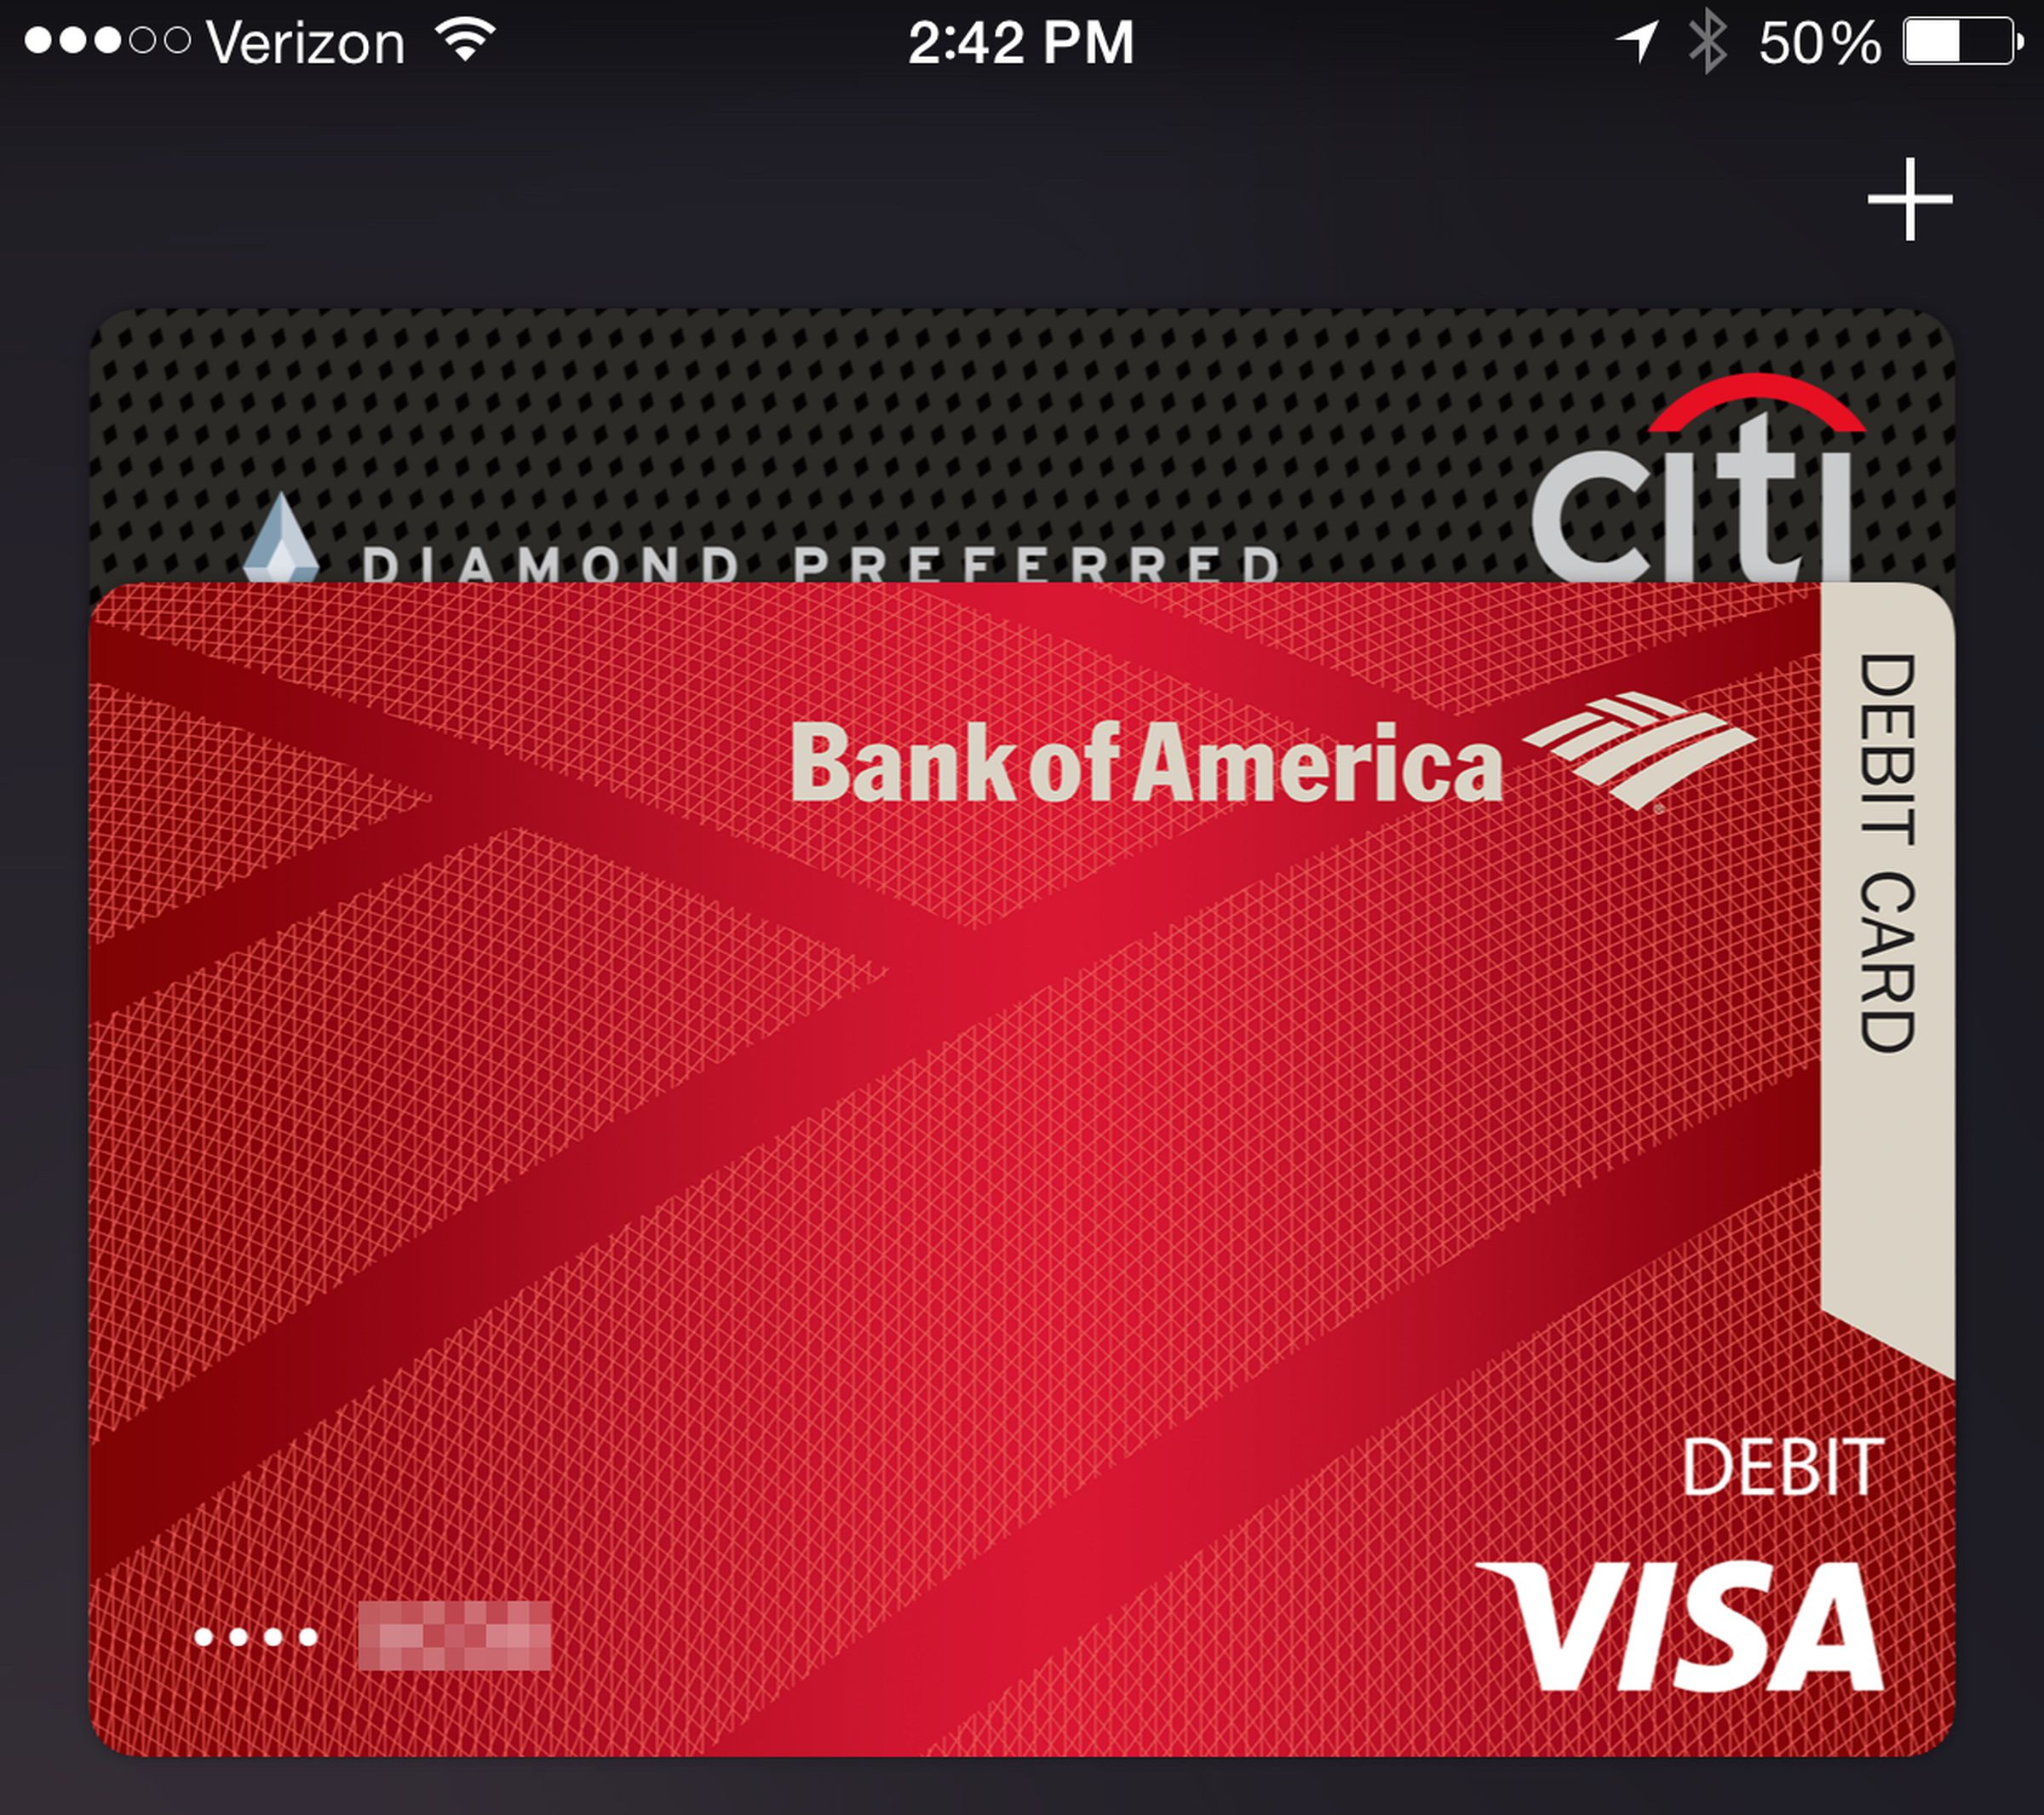 Apple Pay cards view